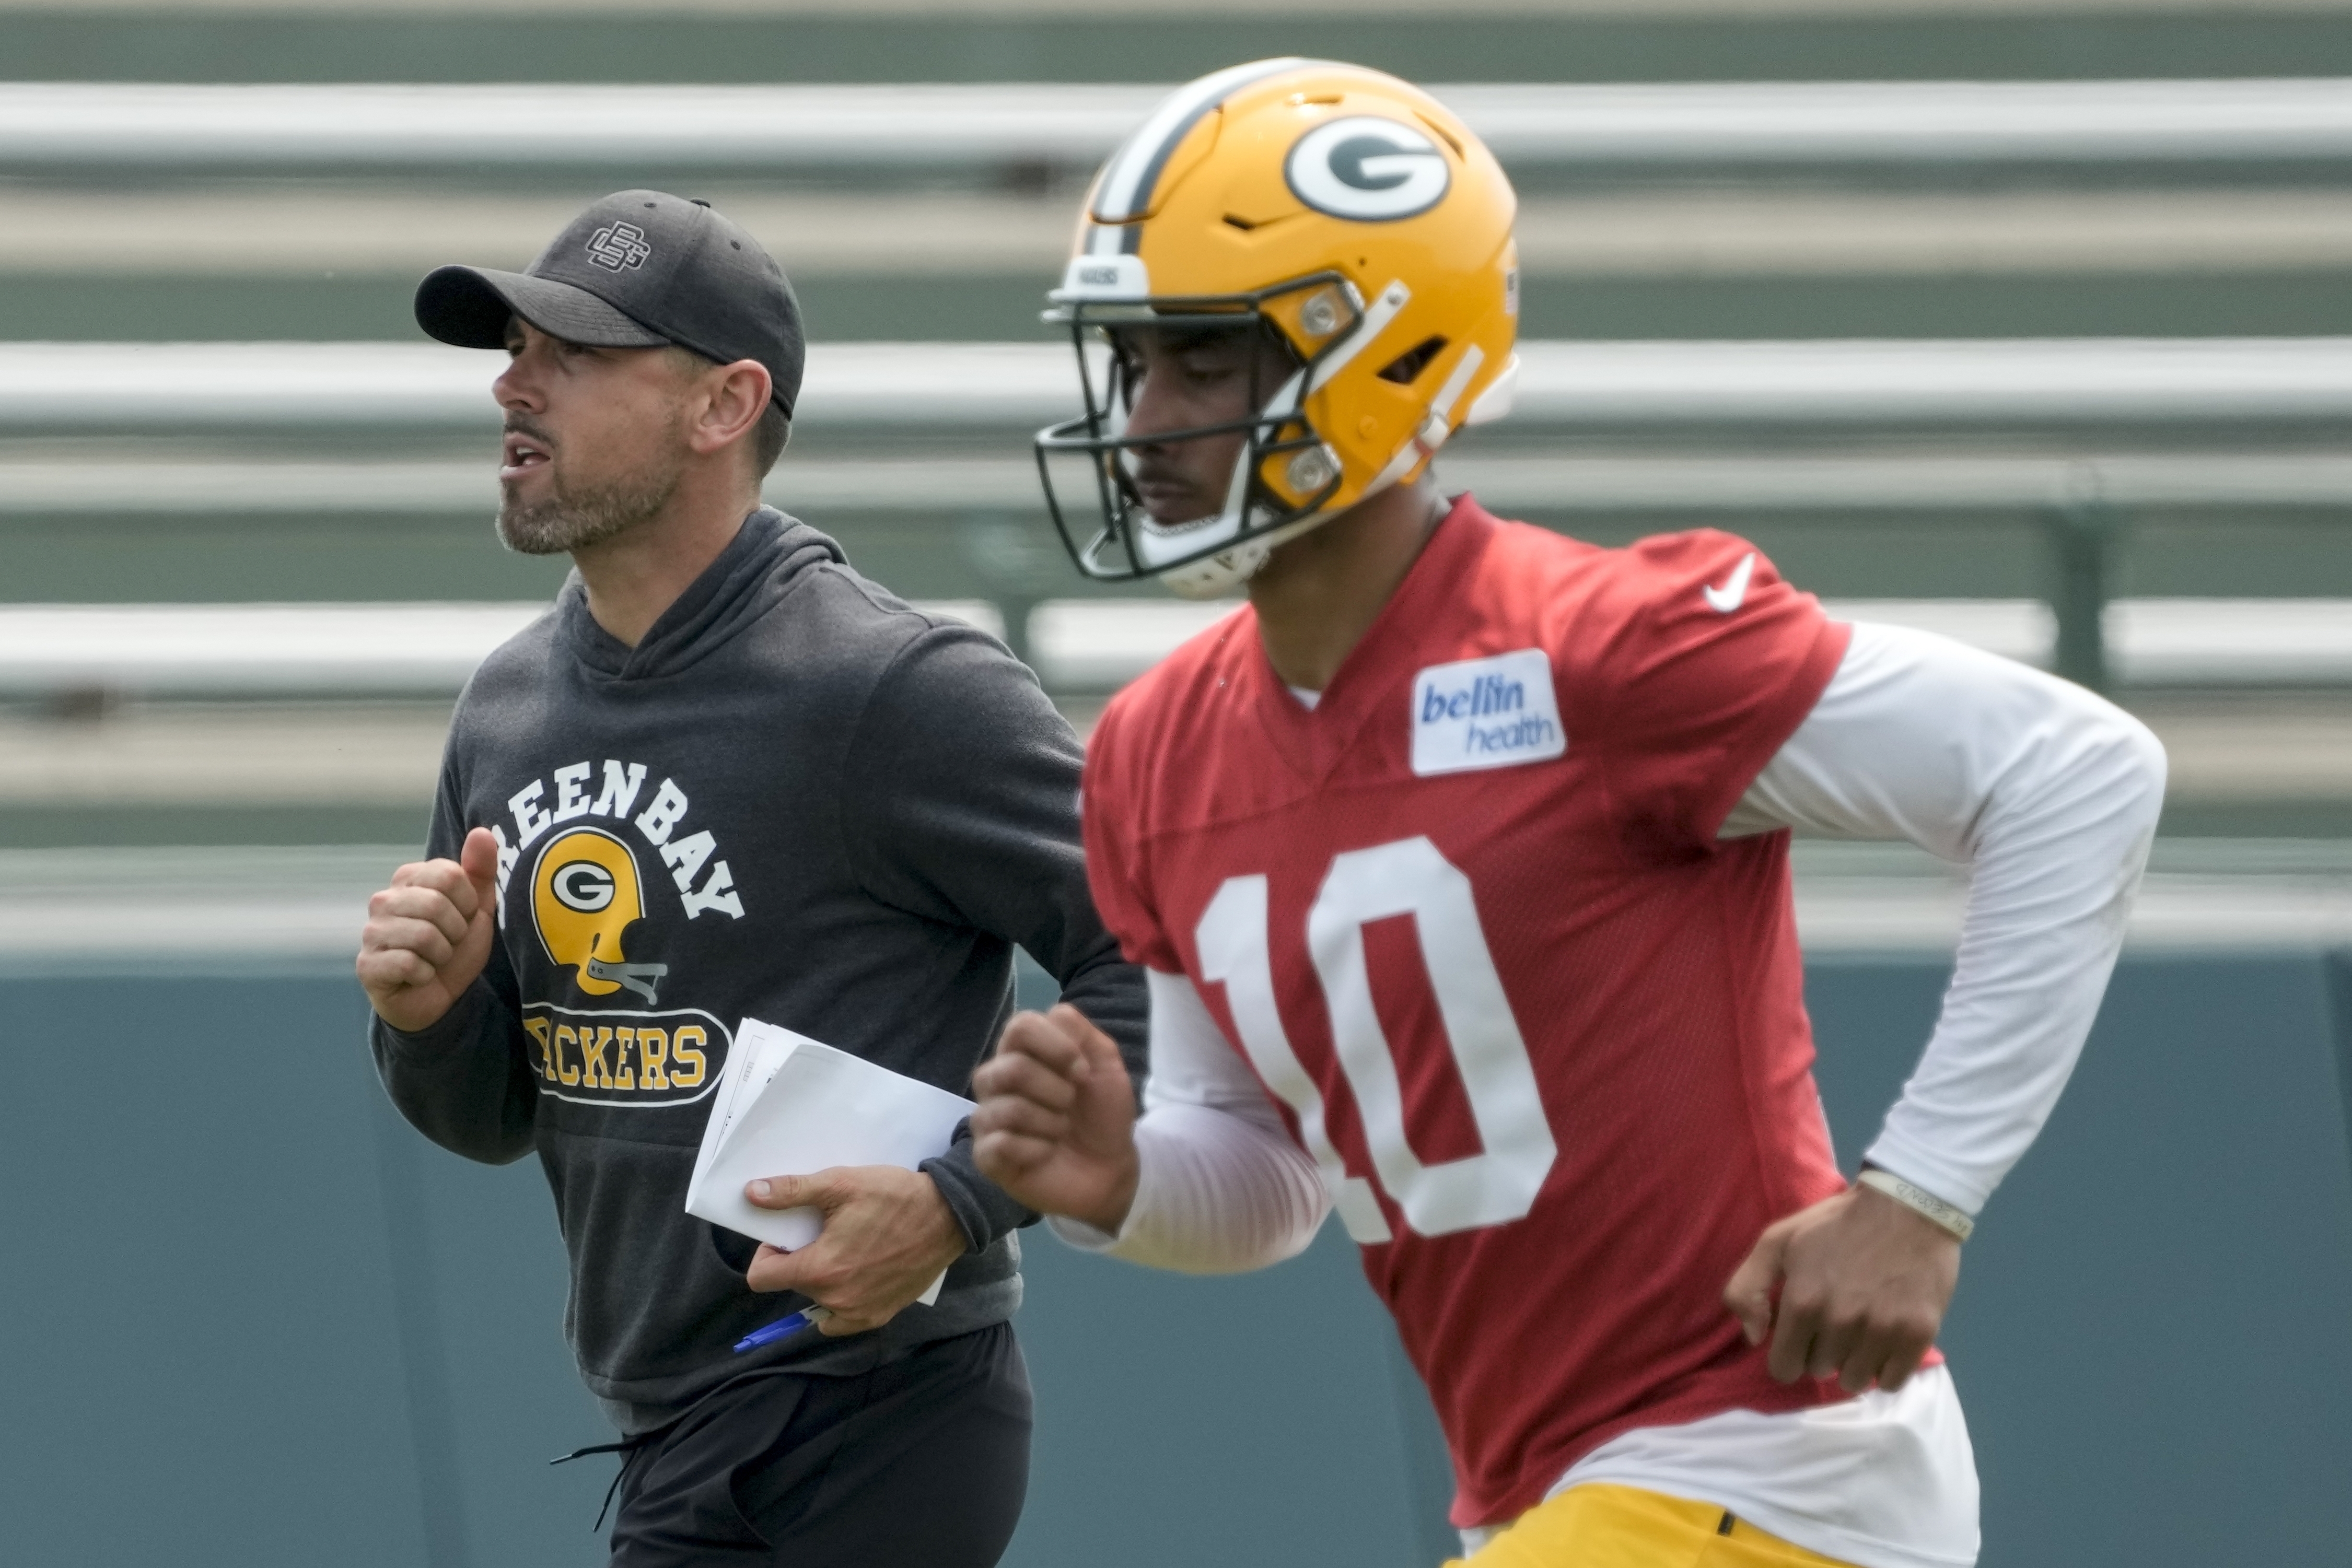 Green Bay's Aaron Rodgers era is over. But is Jordan Love any good?, Green  Bay Packers